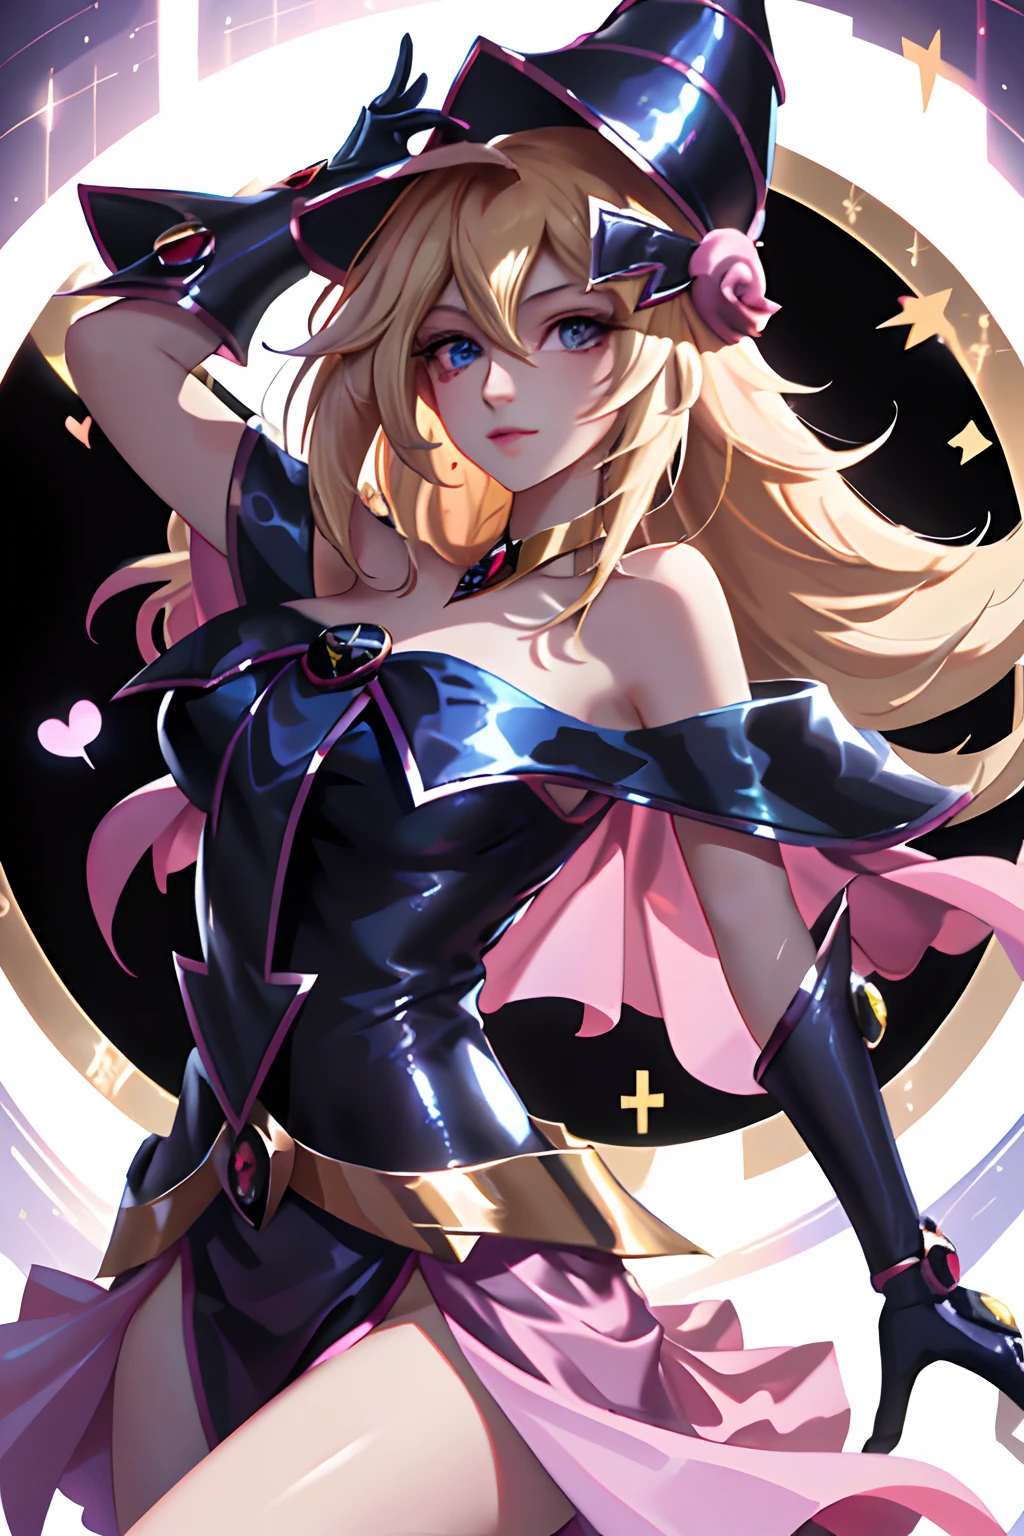 (tmasterpiece, Better quality; 1.3), extremaly detailed cg, ultra - detailed, 1 girl Black magician girl, Solo, ssmile, looking at viewert, Elegant Unger, cabellos largos dorados, eBlue eyes,
SV1, Dark magician girl uniform,  gloves on the elbow, head gear, Sailors lead Rubio, Red ribbons, Orange necklace, whitegloves, jewely, from the above,
Multiple hearts, sface focus, Venus, Tornado, abstract backgrounds, Heartstorm, Hart Lightning, Heart bubbles, Heart balls, Star of Halt, Heart flower, Light of the heart, The world of the heart, heartbackground, background of the galaxy, Heart weapons, The halo of the heart, magia. Black mage girl hot